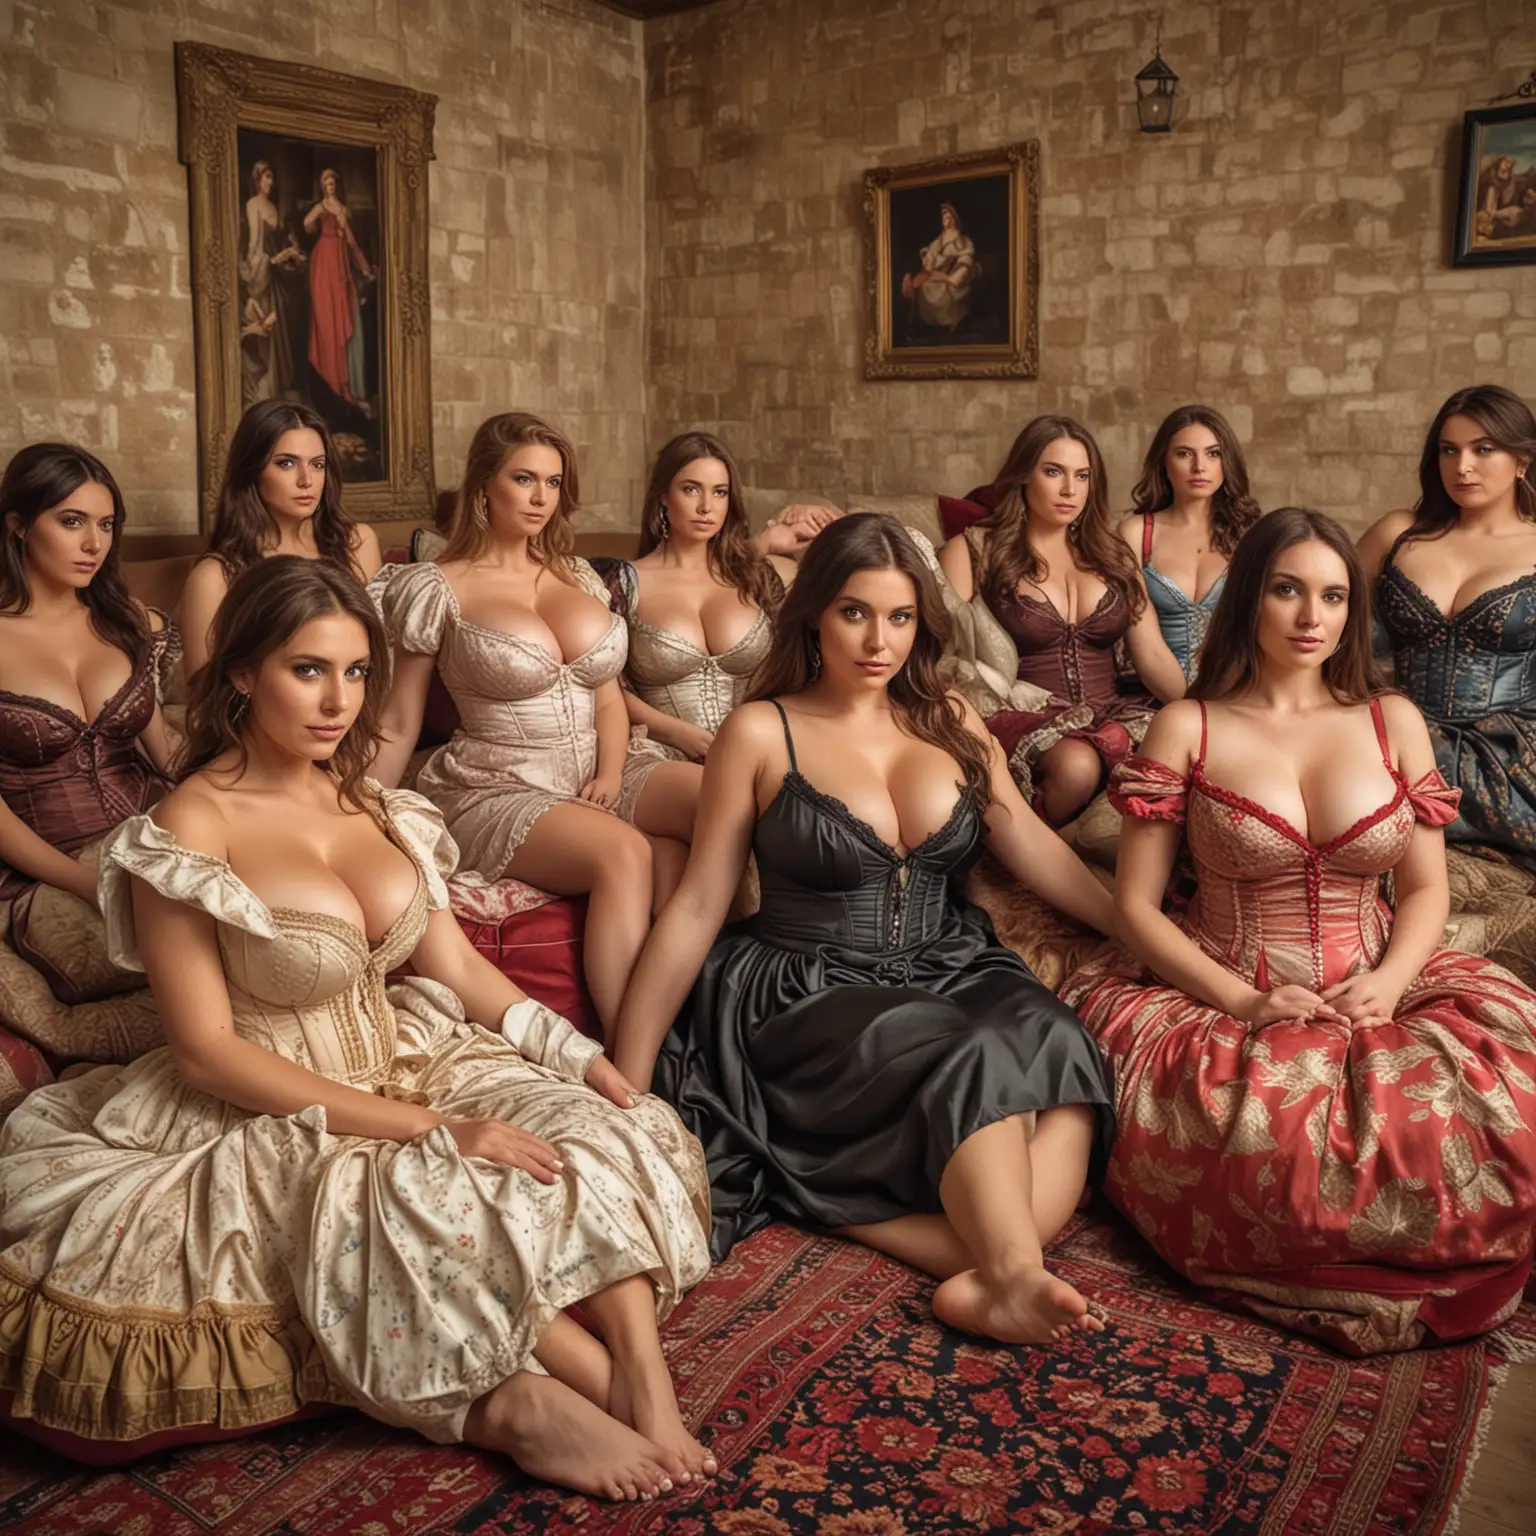 A room full of beautiful women wearing revealing dresses, big breasts, they are sitting on cushions, saracens style.